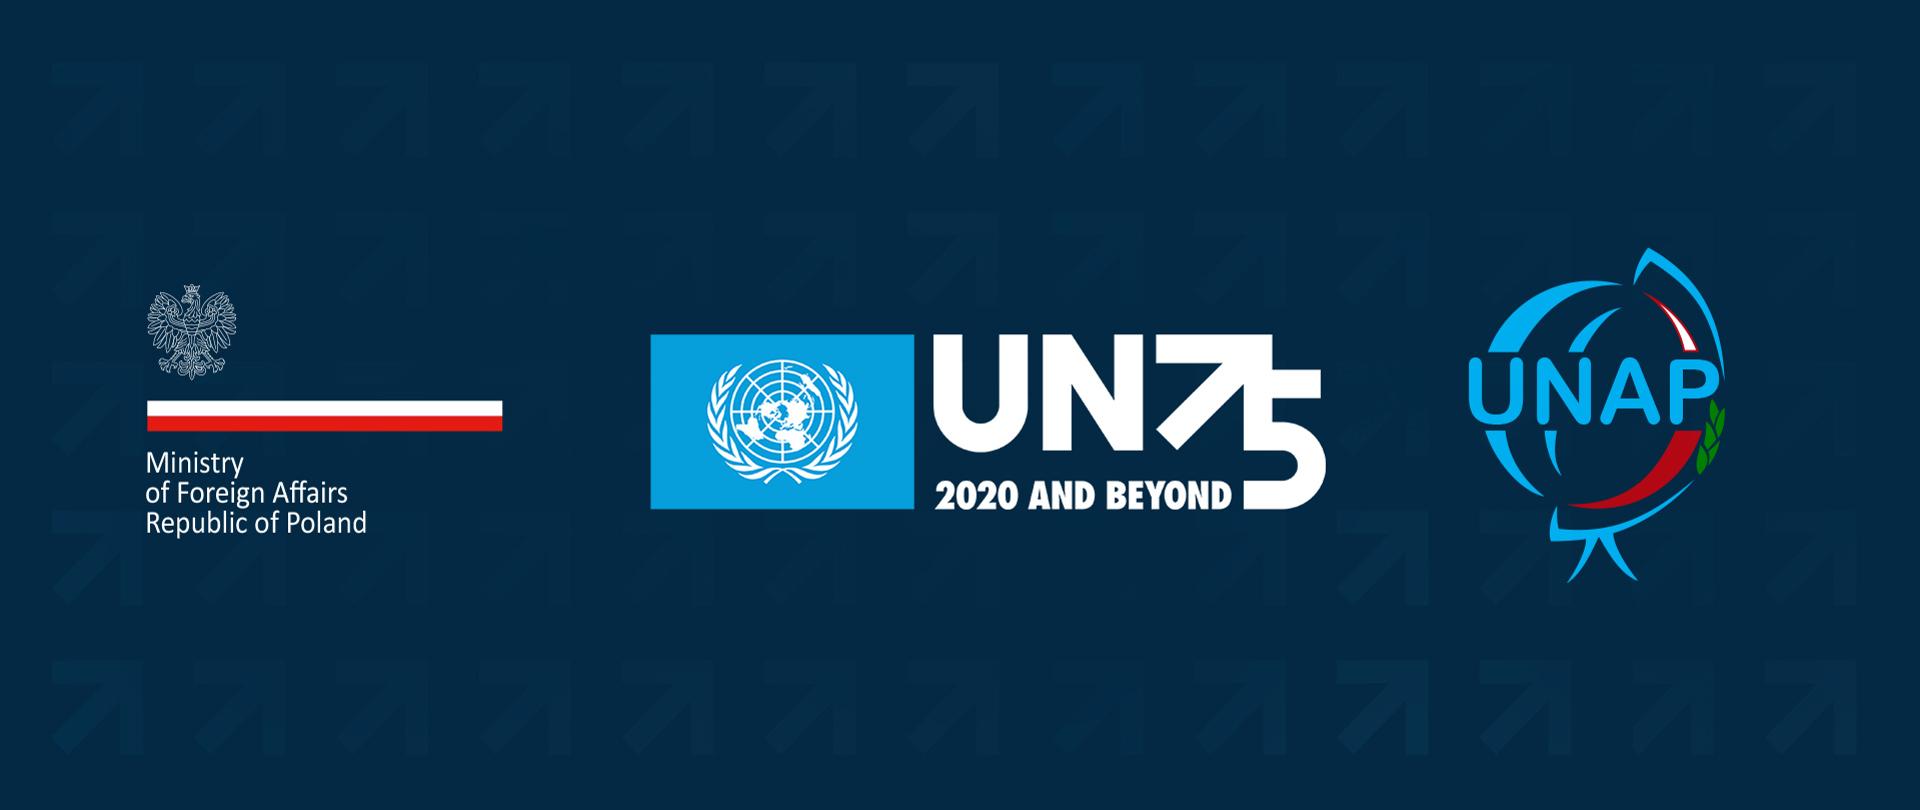 UN Week – 75 Anniversary of the United Nations - Logo